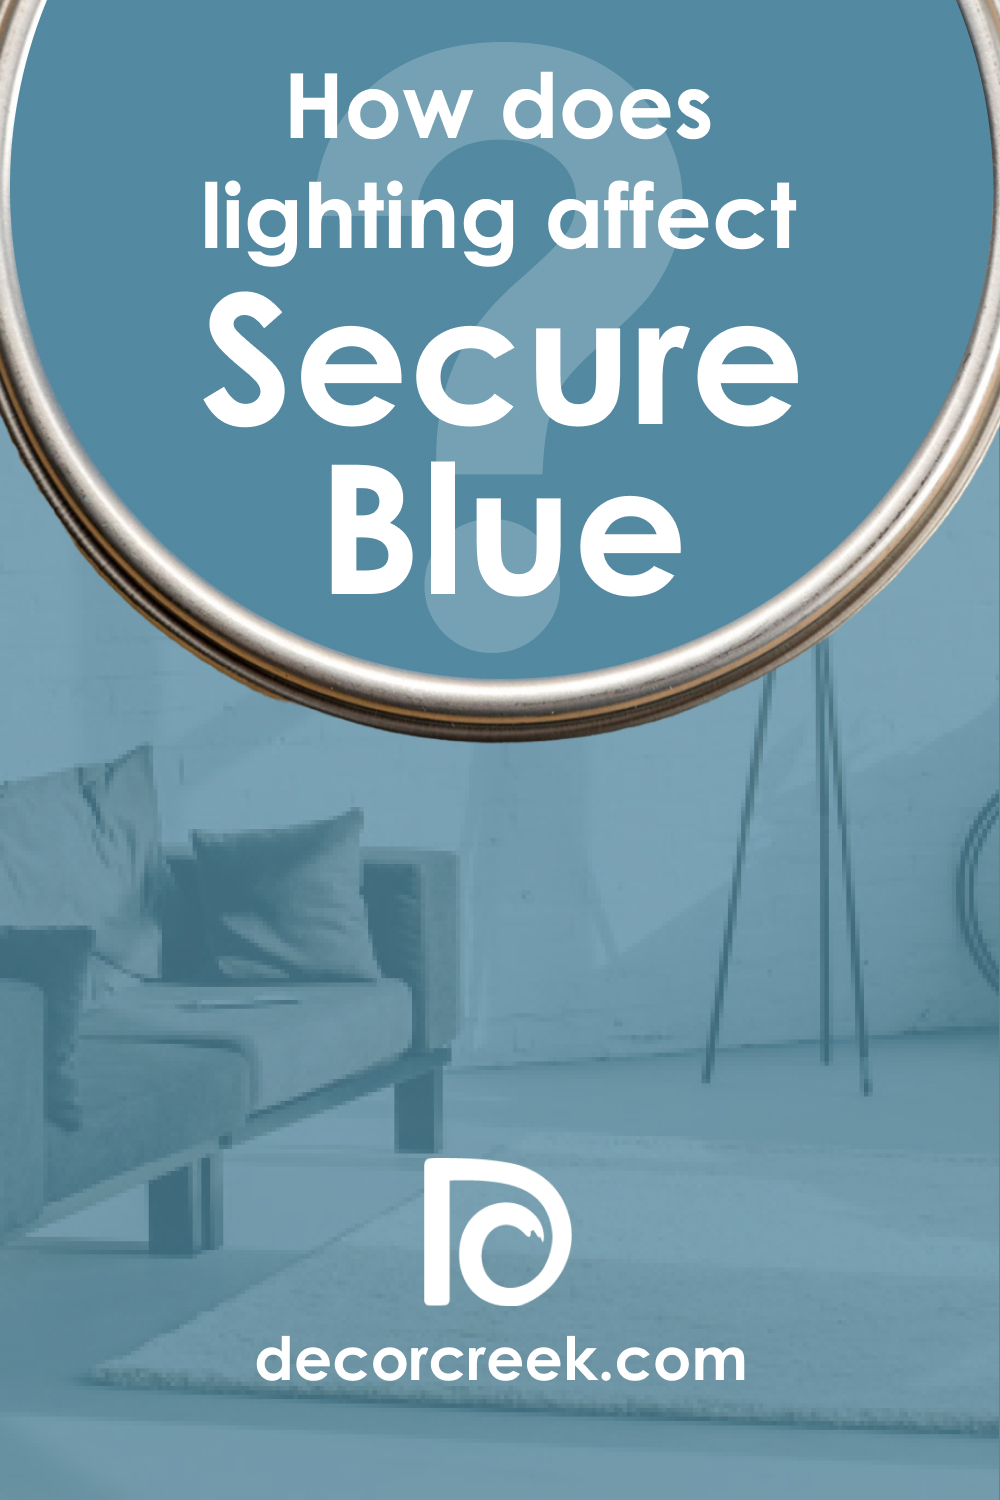 How Does Lighting Affect Secure Blue SW 6508?